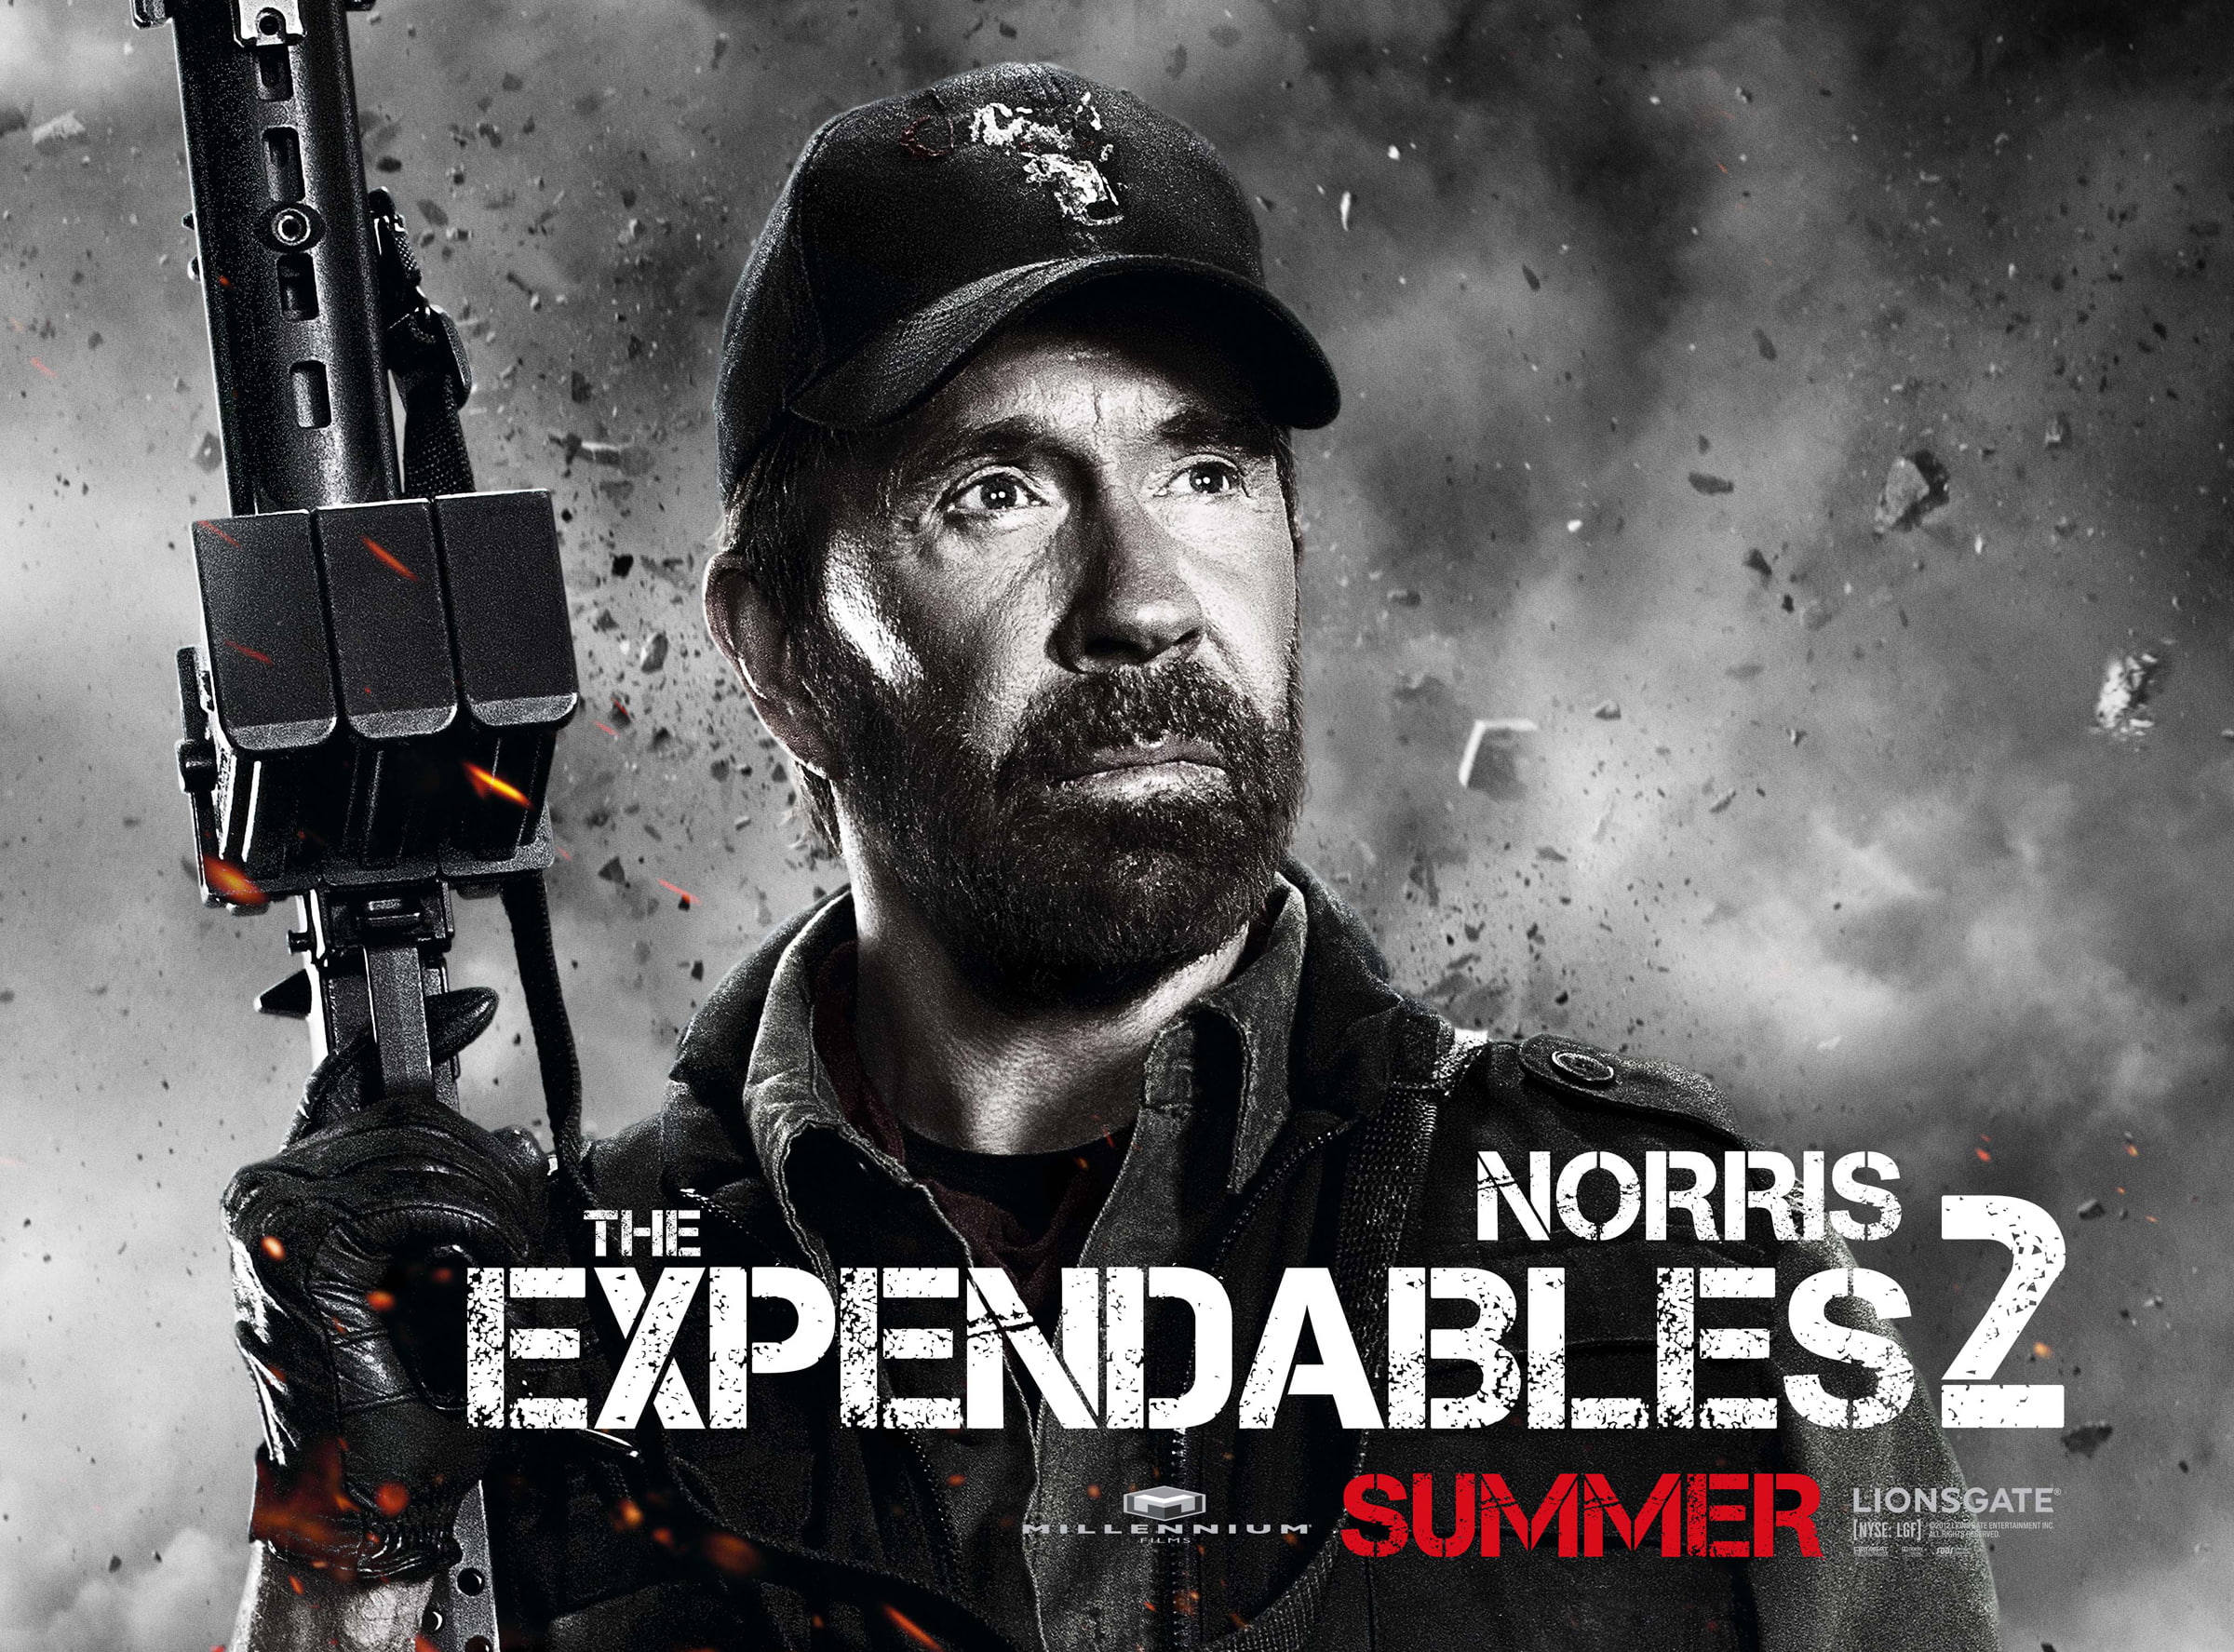 Chuck Norris, The Expendables 2, Booker